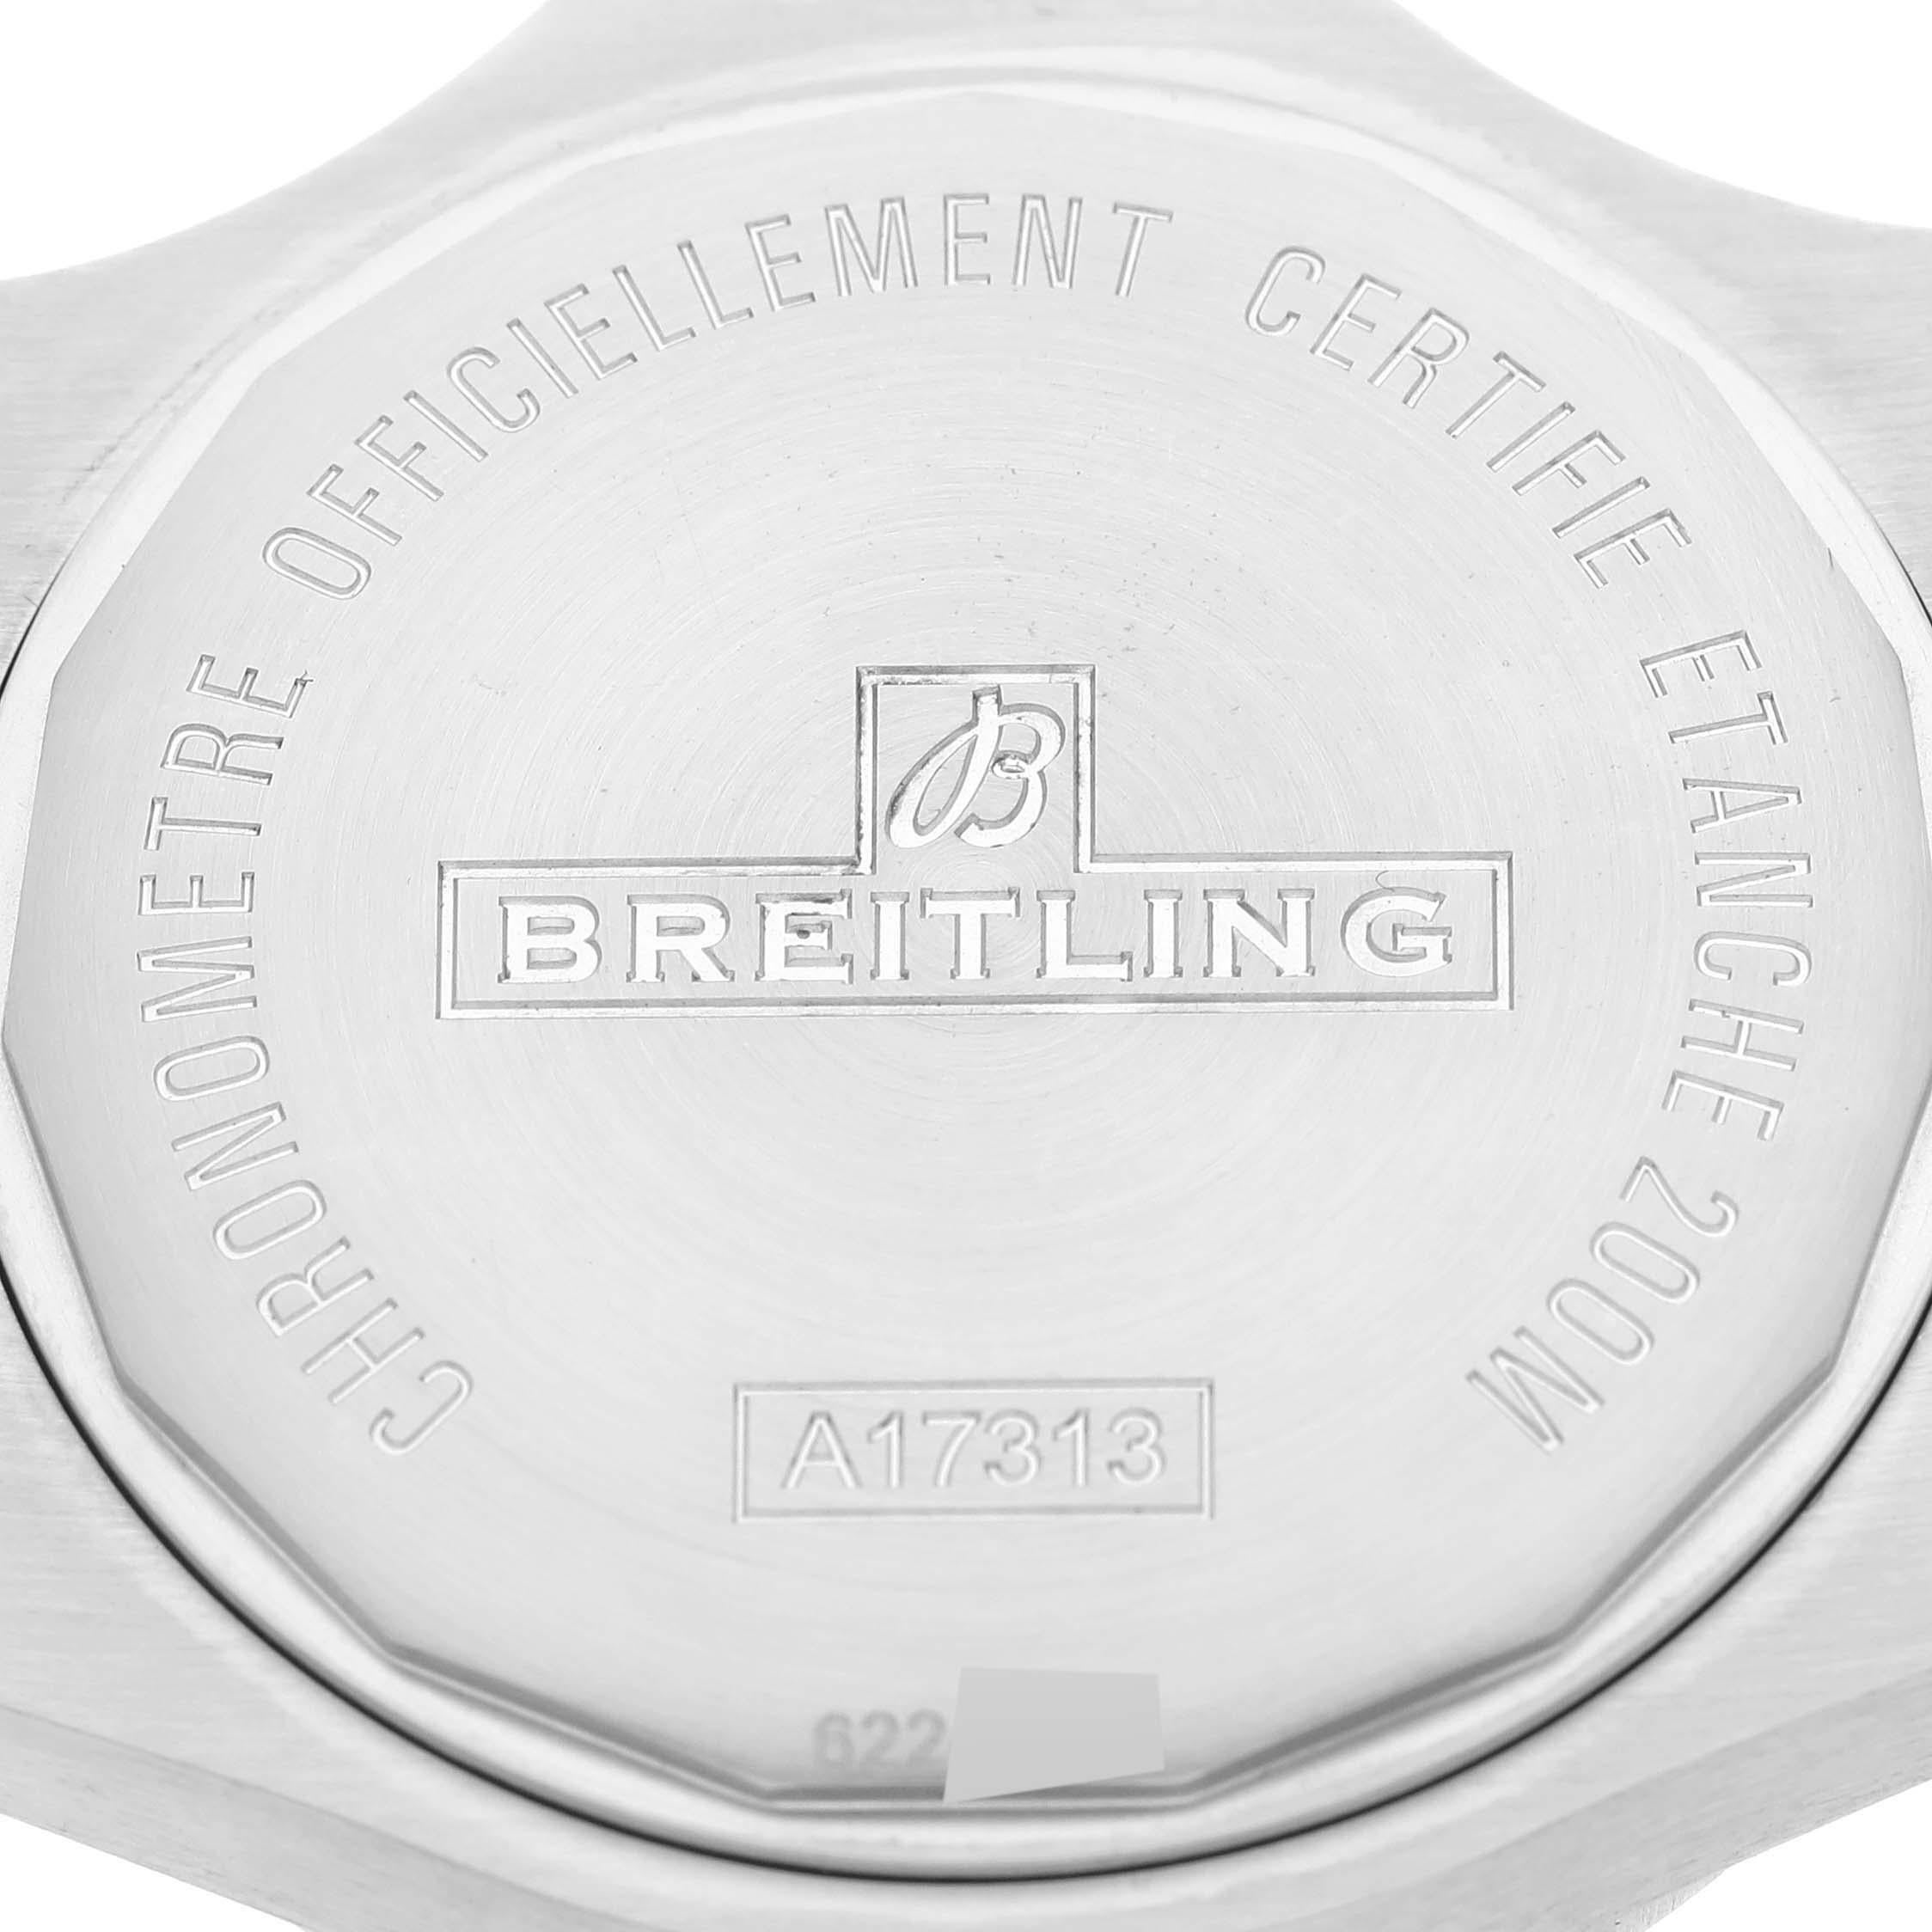 Men's Breitling Colt White Dial Automatic Steel Mens Watch A17313 Box Card